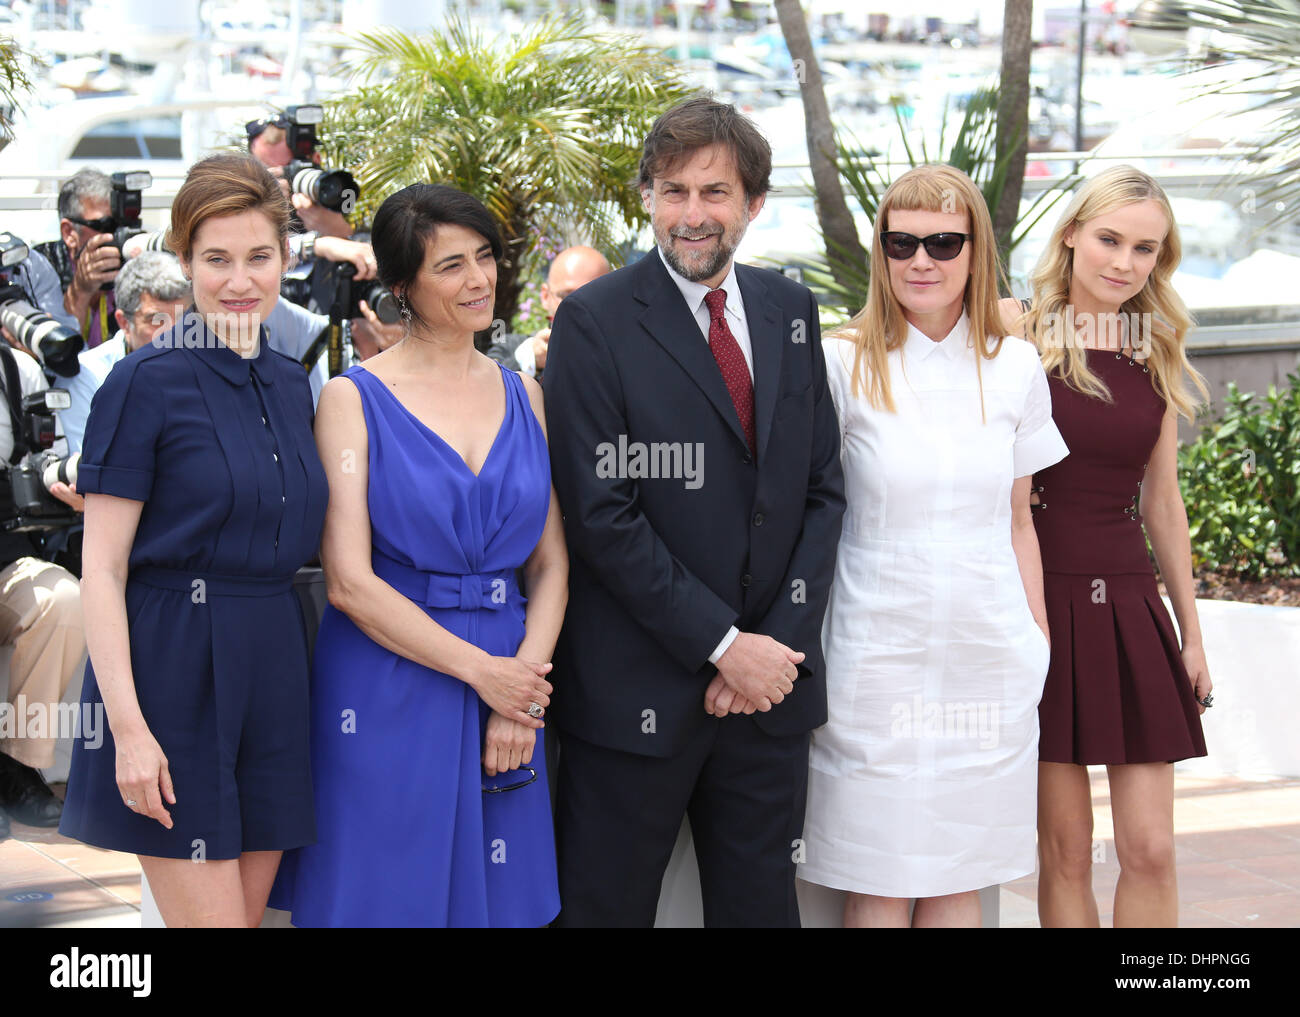 Emmanuelle Devos, Hiam Abbass, Nanni Moretti, Andrea Arnold, Diane Kruger Jury photocall - during the 65th Cannes Film Festival Cannes, France - 16.05.12 Stock Photo